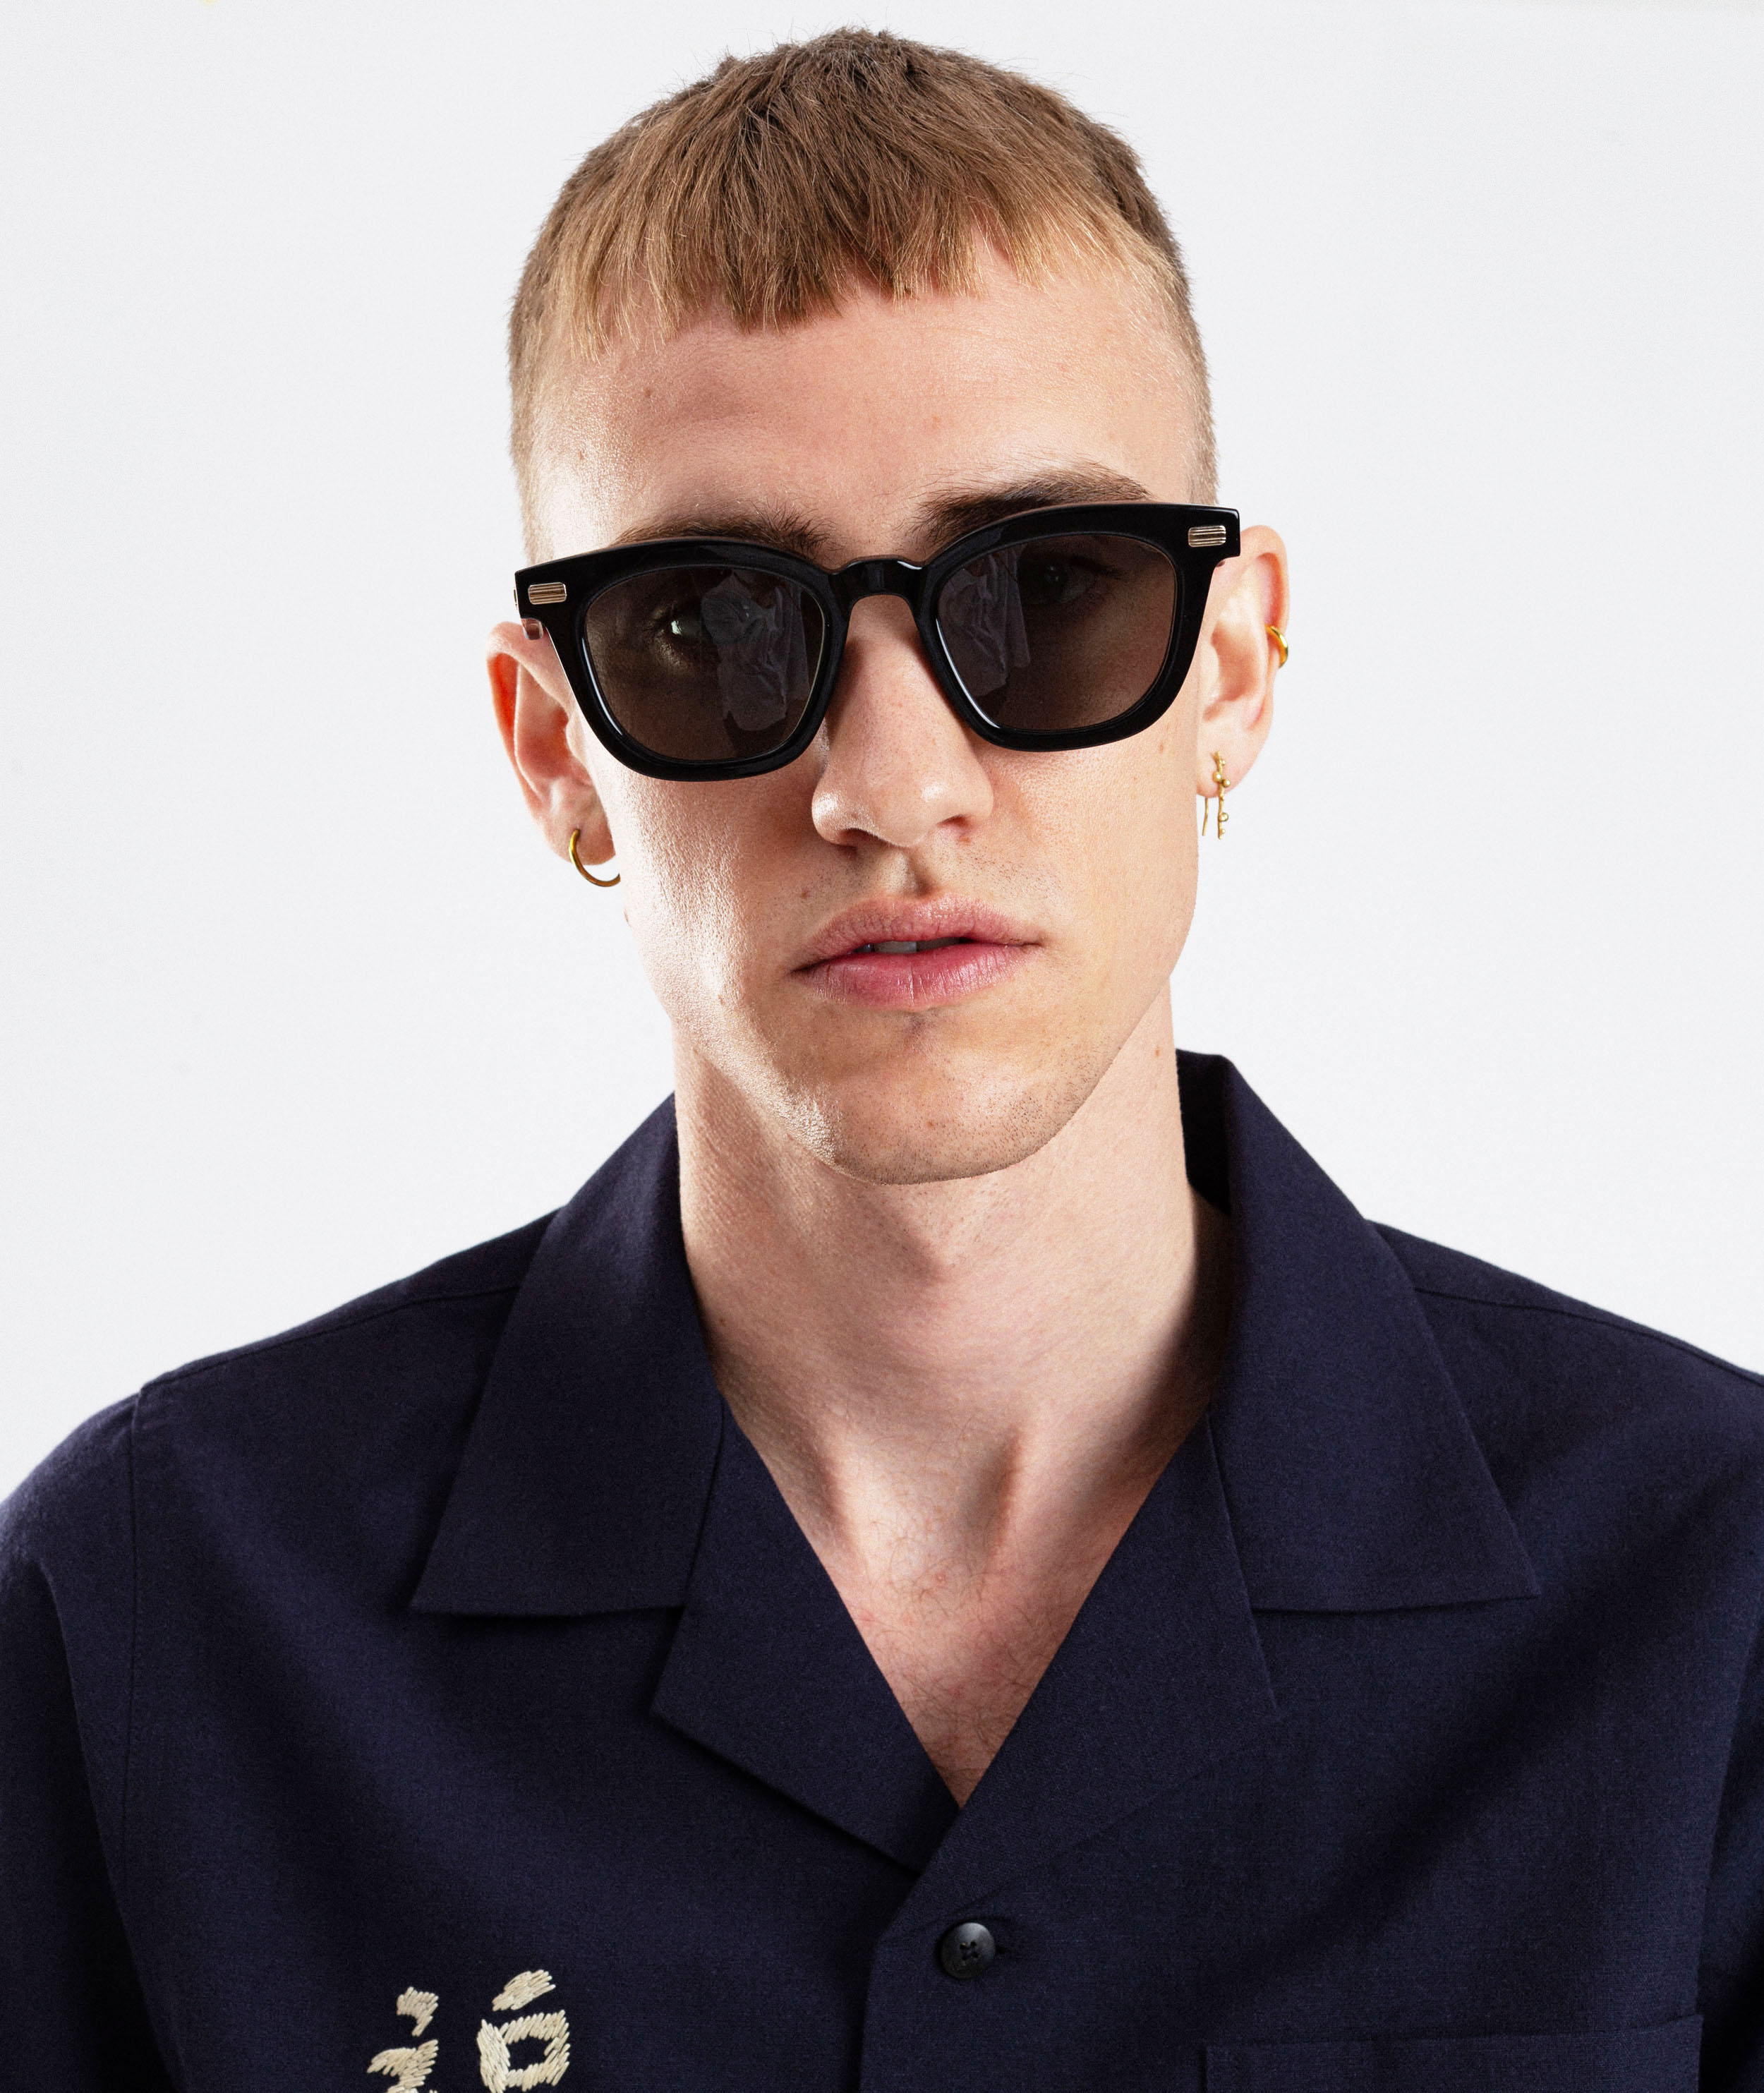 Norse Store | Shipping Worldwide - Sunglasses - Native Sons 